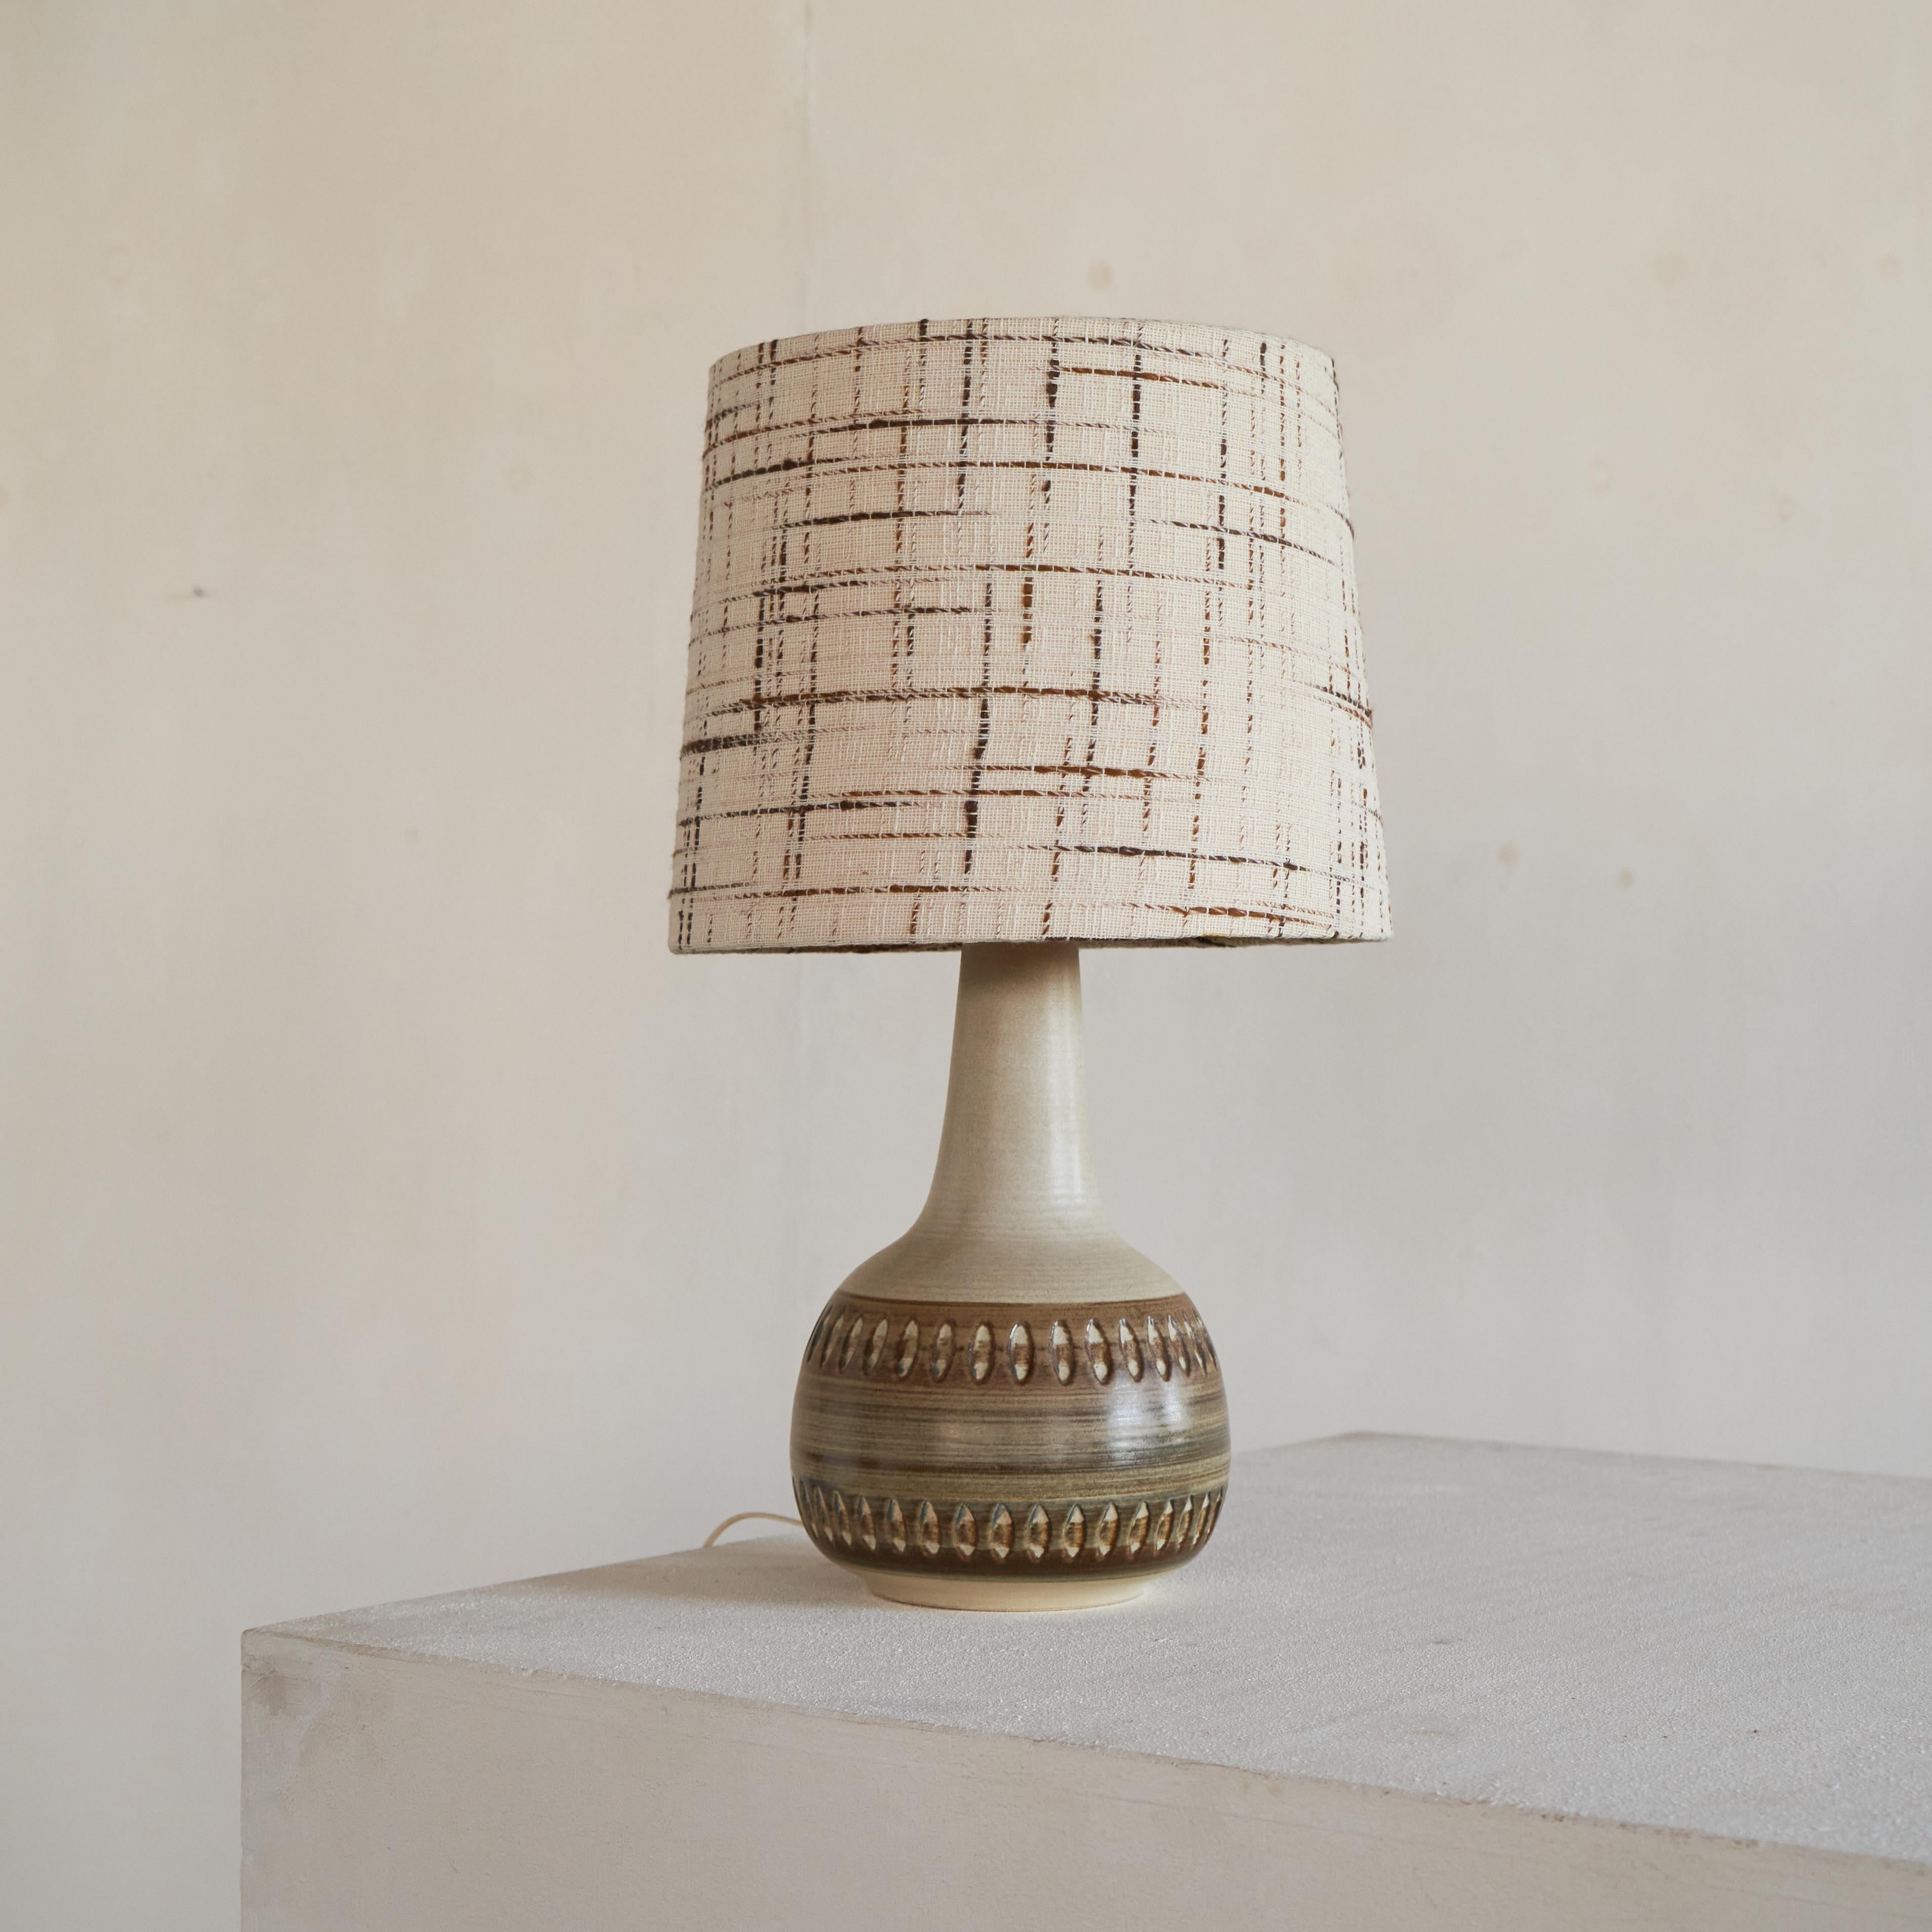 Søholm Stentøj Danish Studio Pottery Table Lamp with Original Shade 1960s For Sale 6